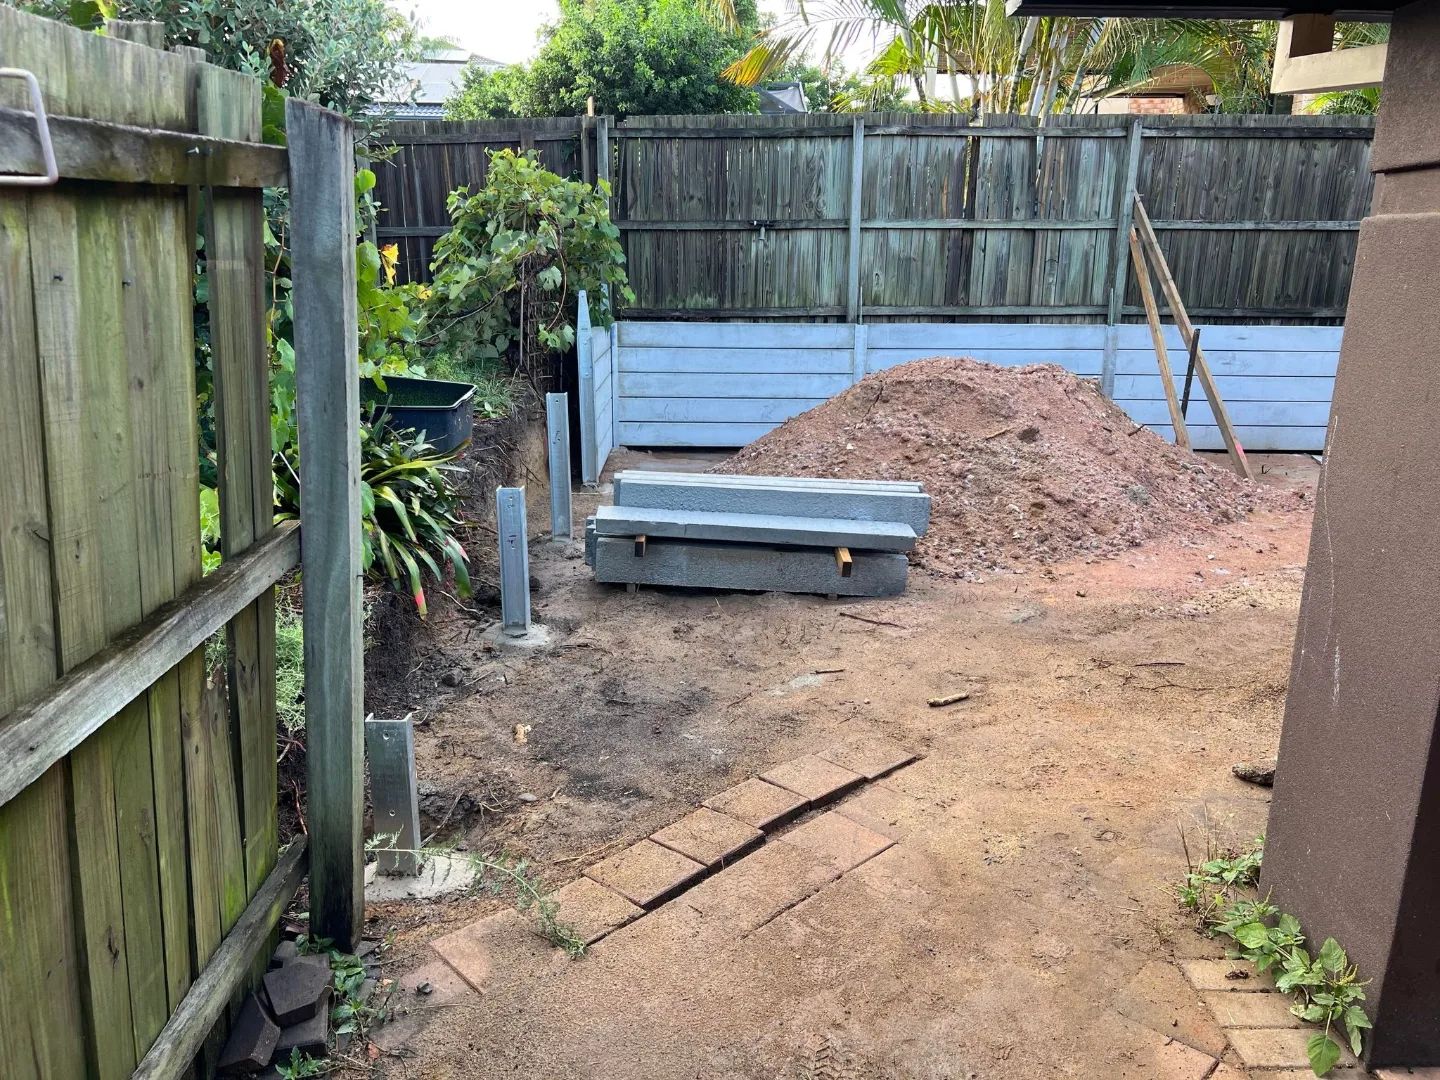 Large dig out, concrete retaining wall and colourbond fencing